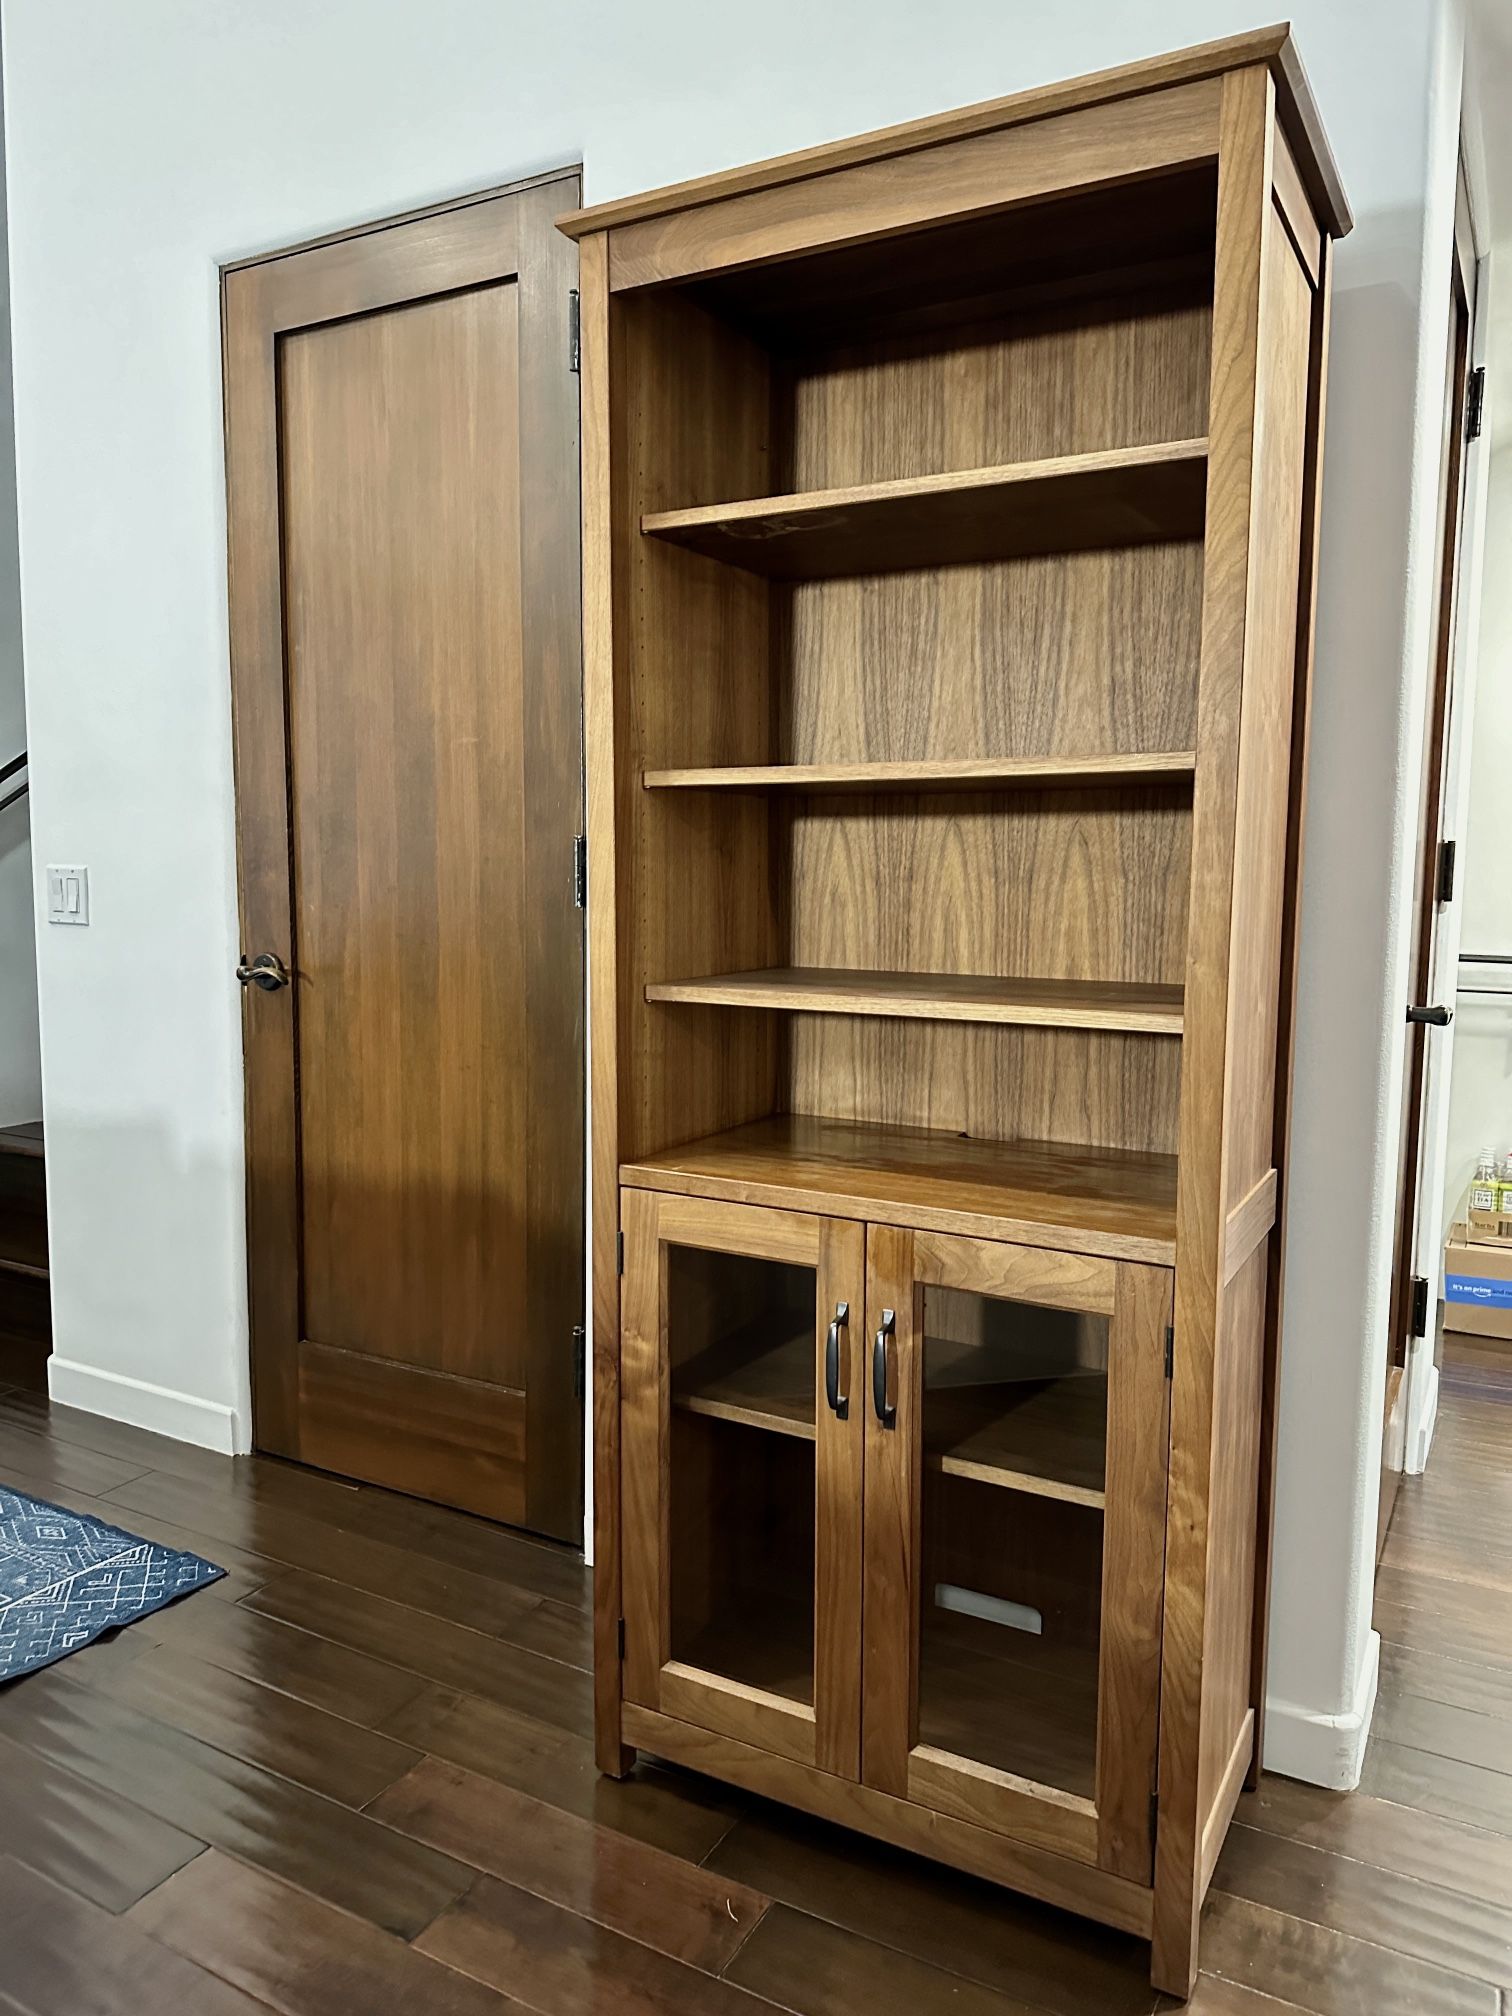 Crate and Barrel Ainsworth Walnut Shelves / Bookcase Media Storage Tower / Cabinet